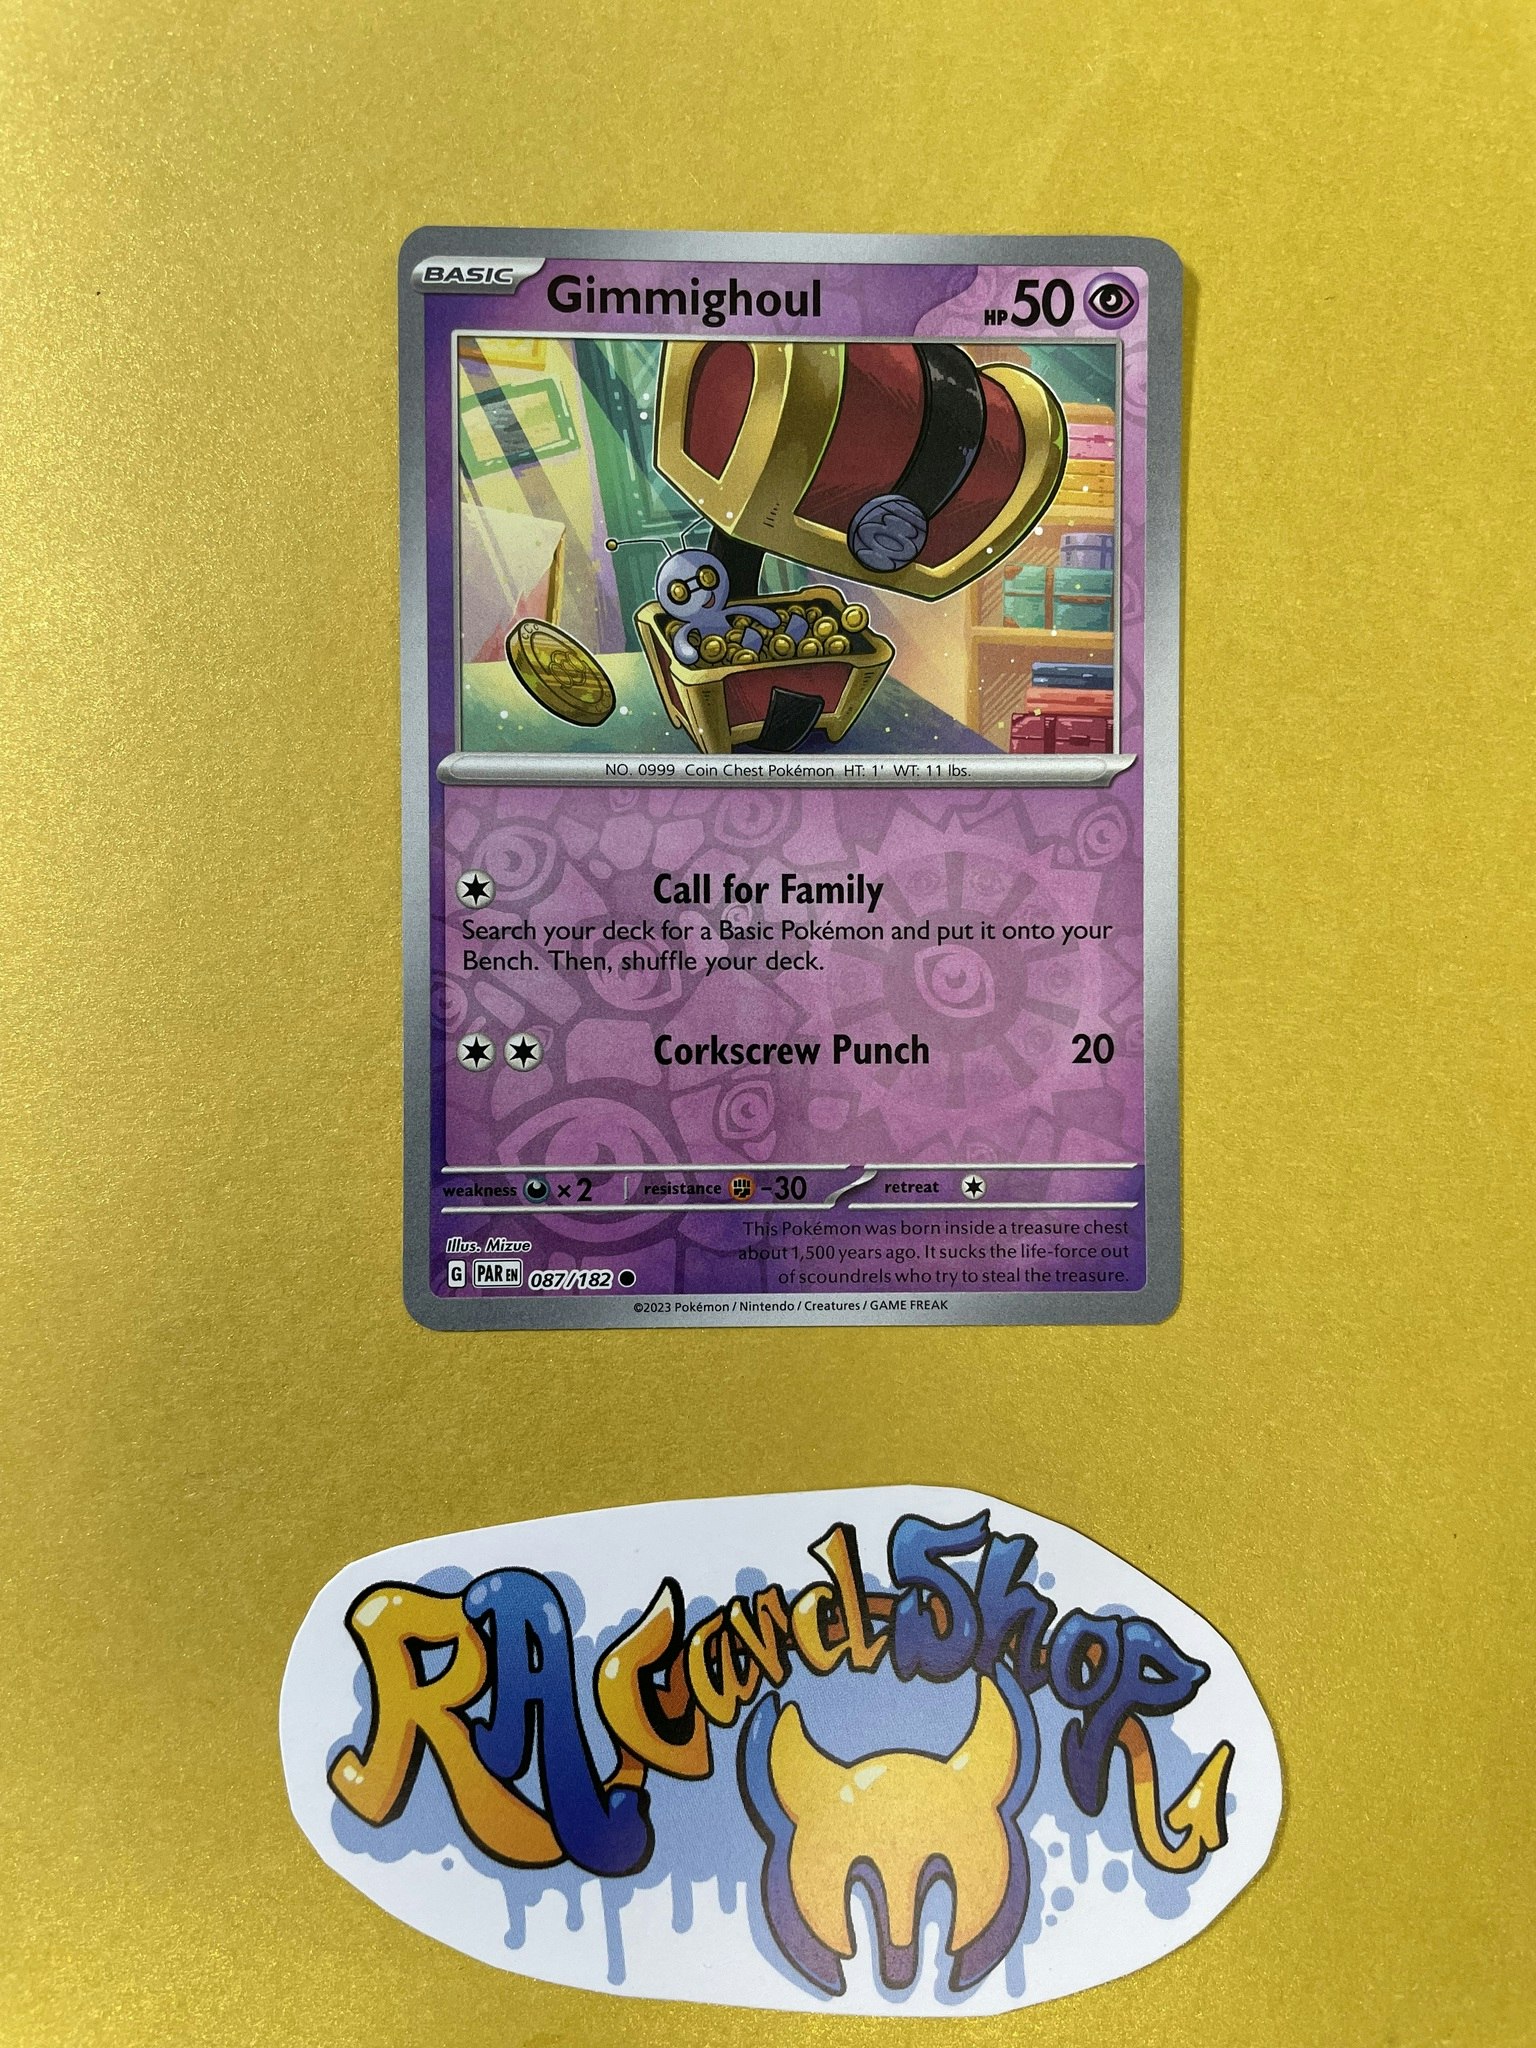 Gimmighoul Reverse Holo Common 087/182 Paradox Rift Pokemon